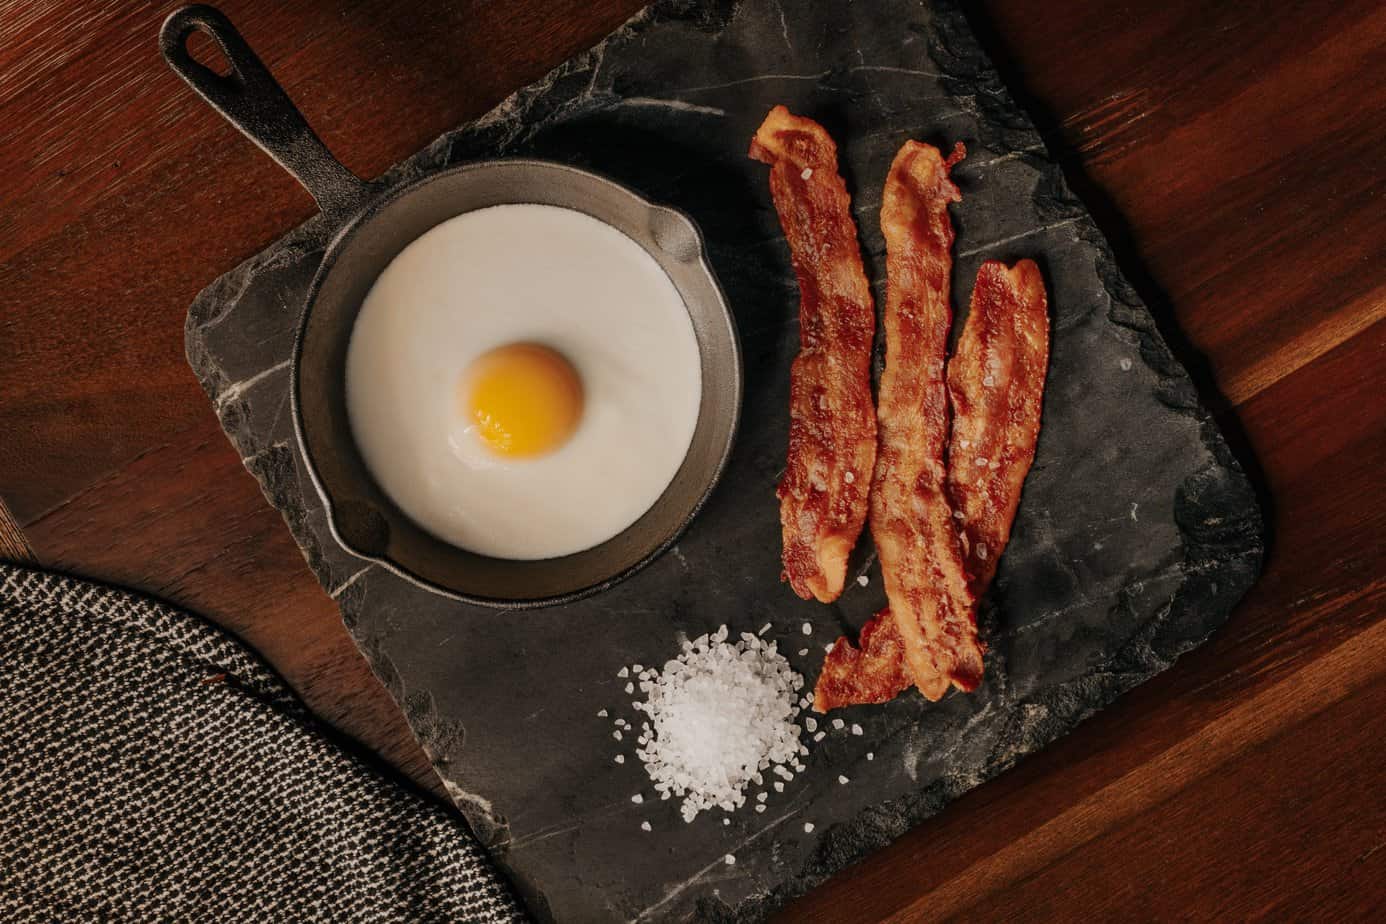 Know all about bacon-inspired dishes